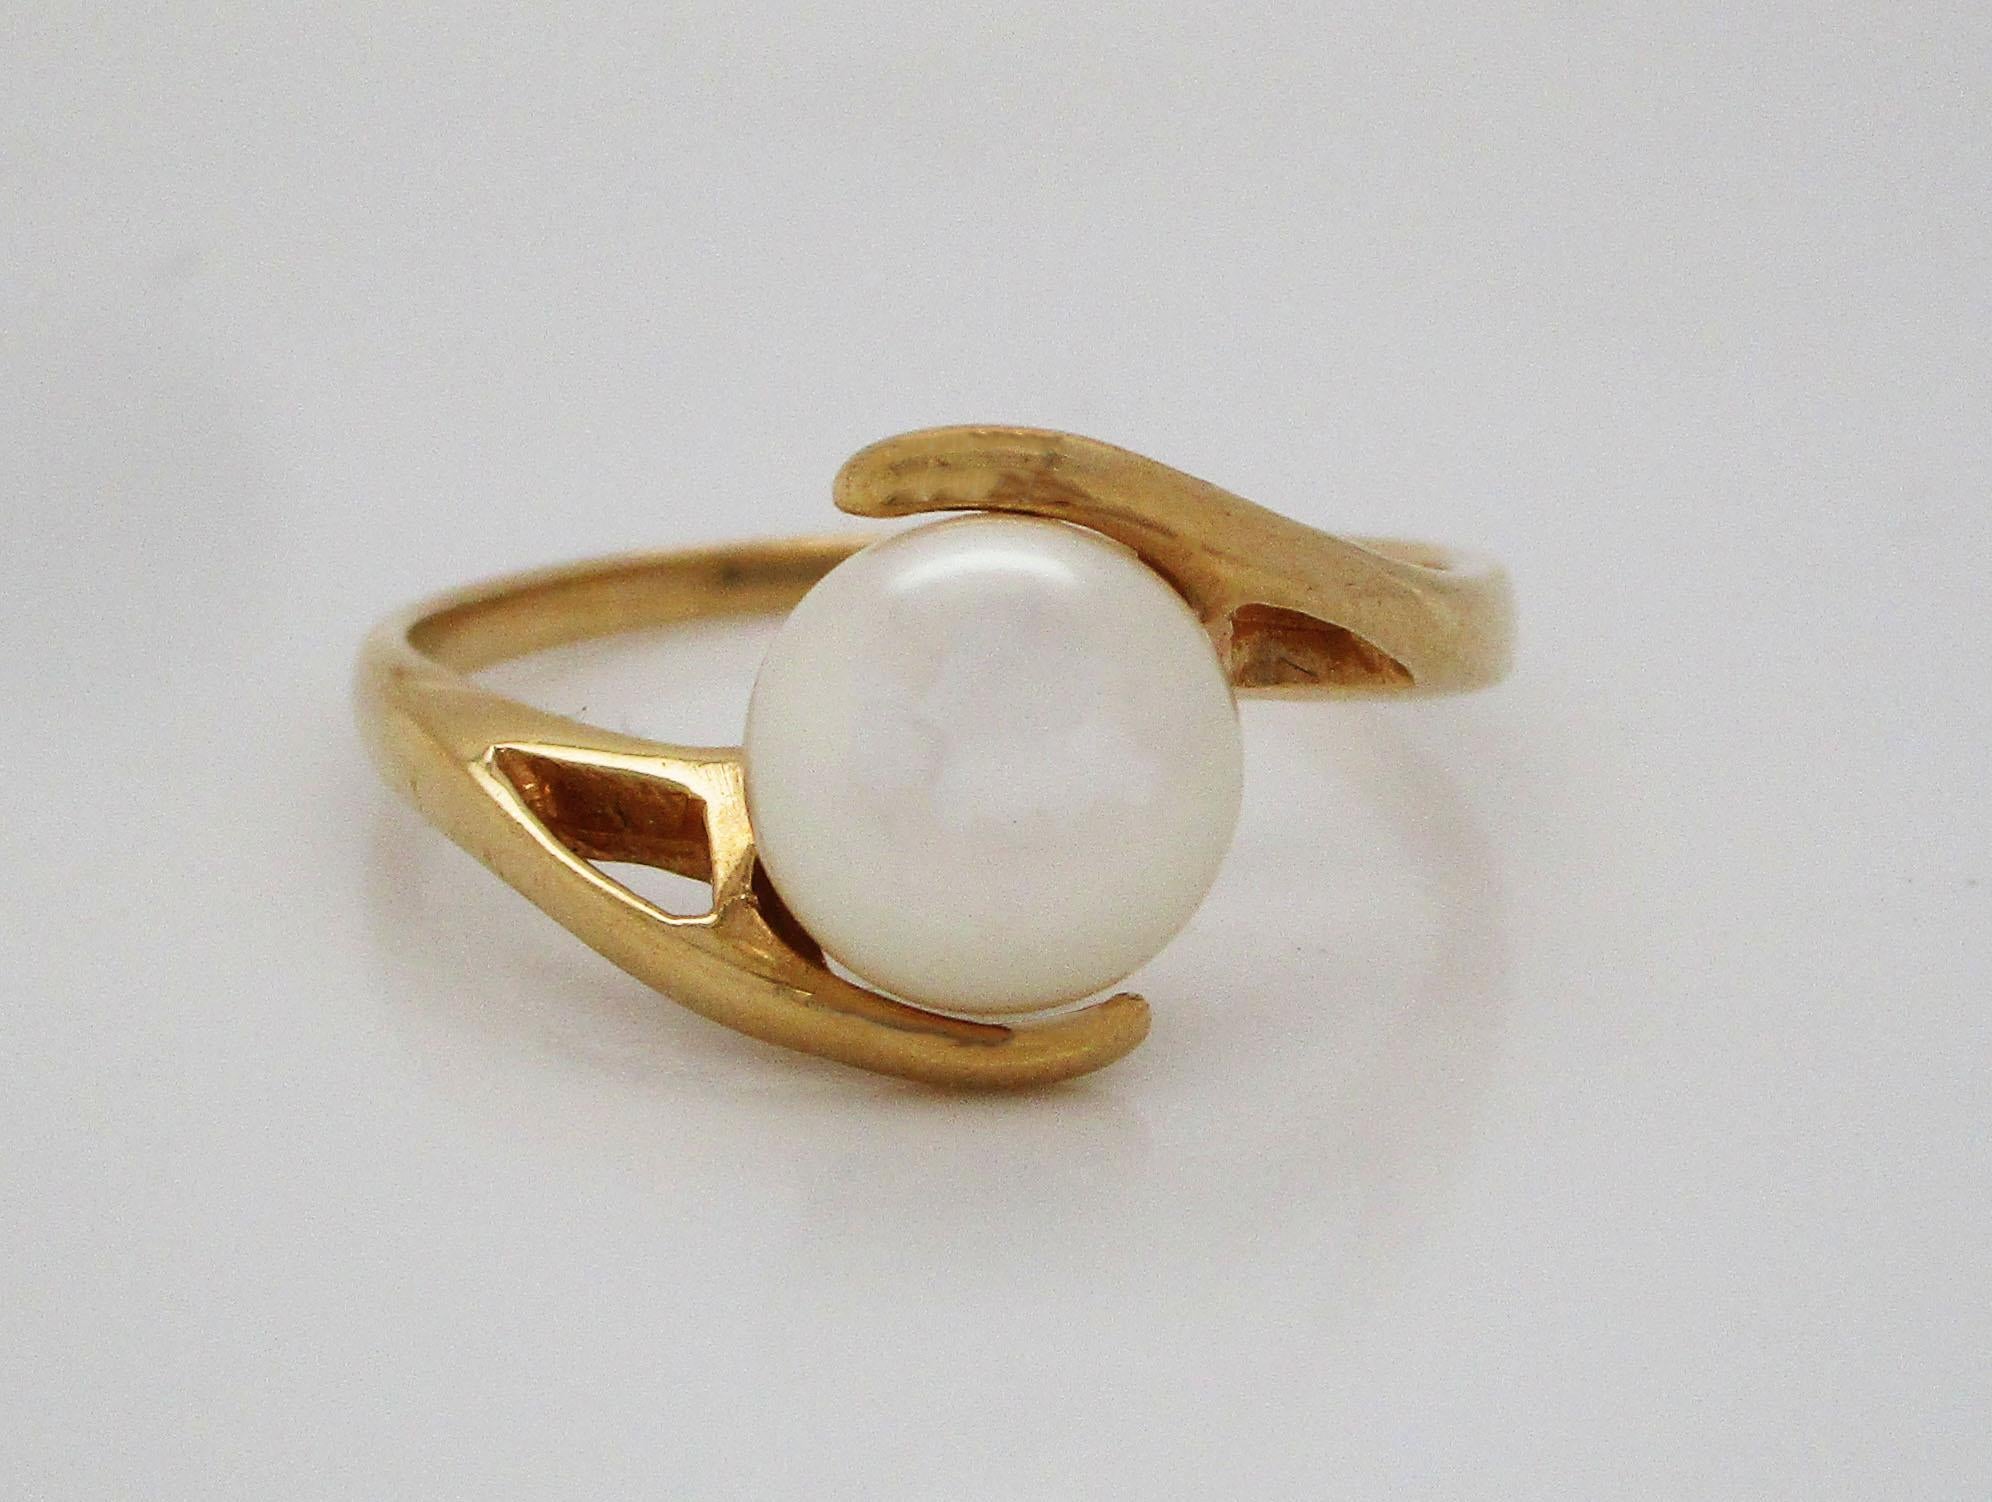 This stunning ring is in 14k yellow gold in a beautiful bypass design and boasting a gorgeous white pearl center! This is the ideal ring for someone searching for a non-traditional engagement ring. The pairing of 14k yellow gold and the brilliant